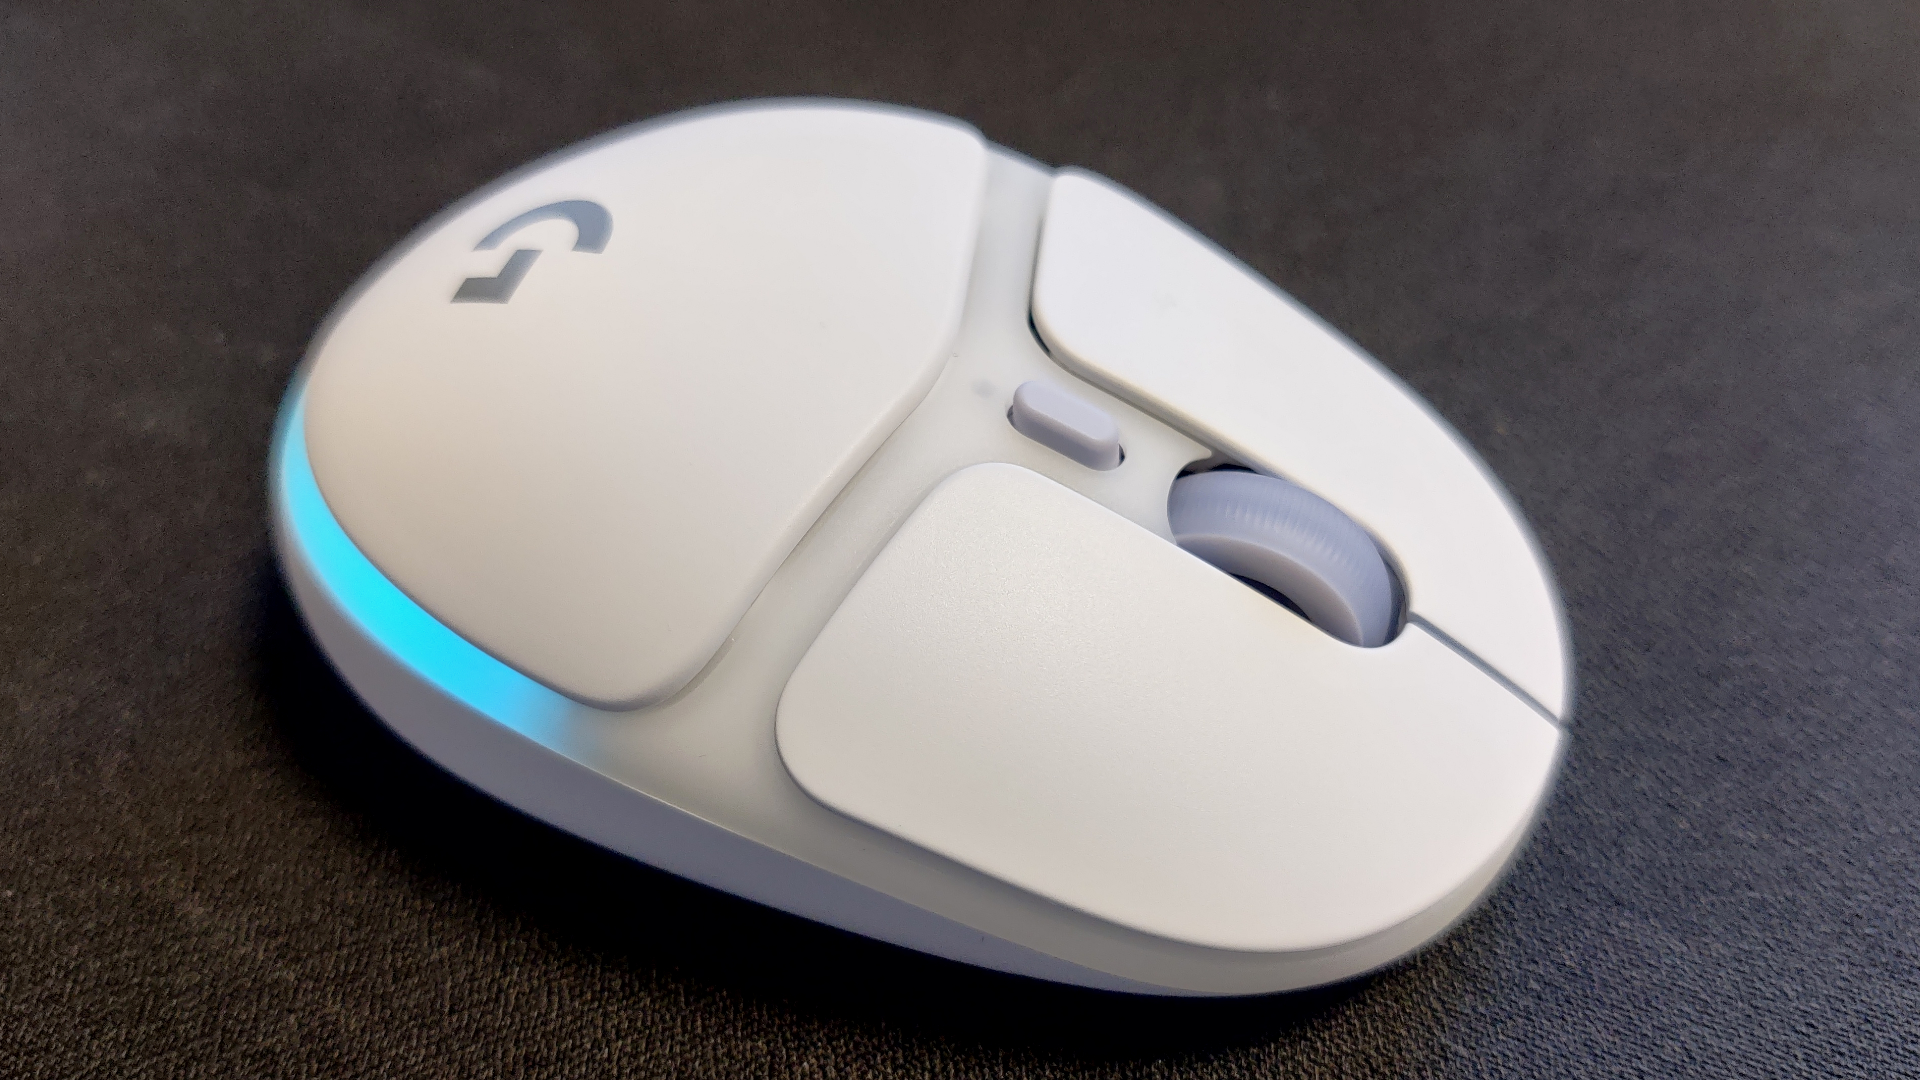 The Logitech G705 gaming mouse side on.